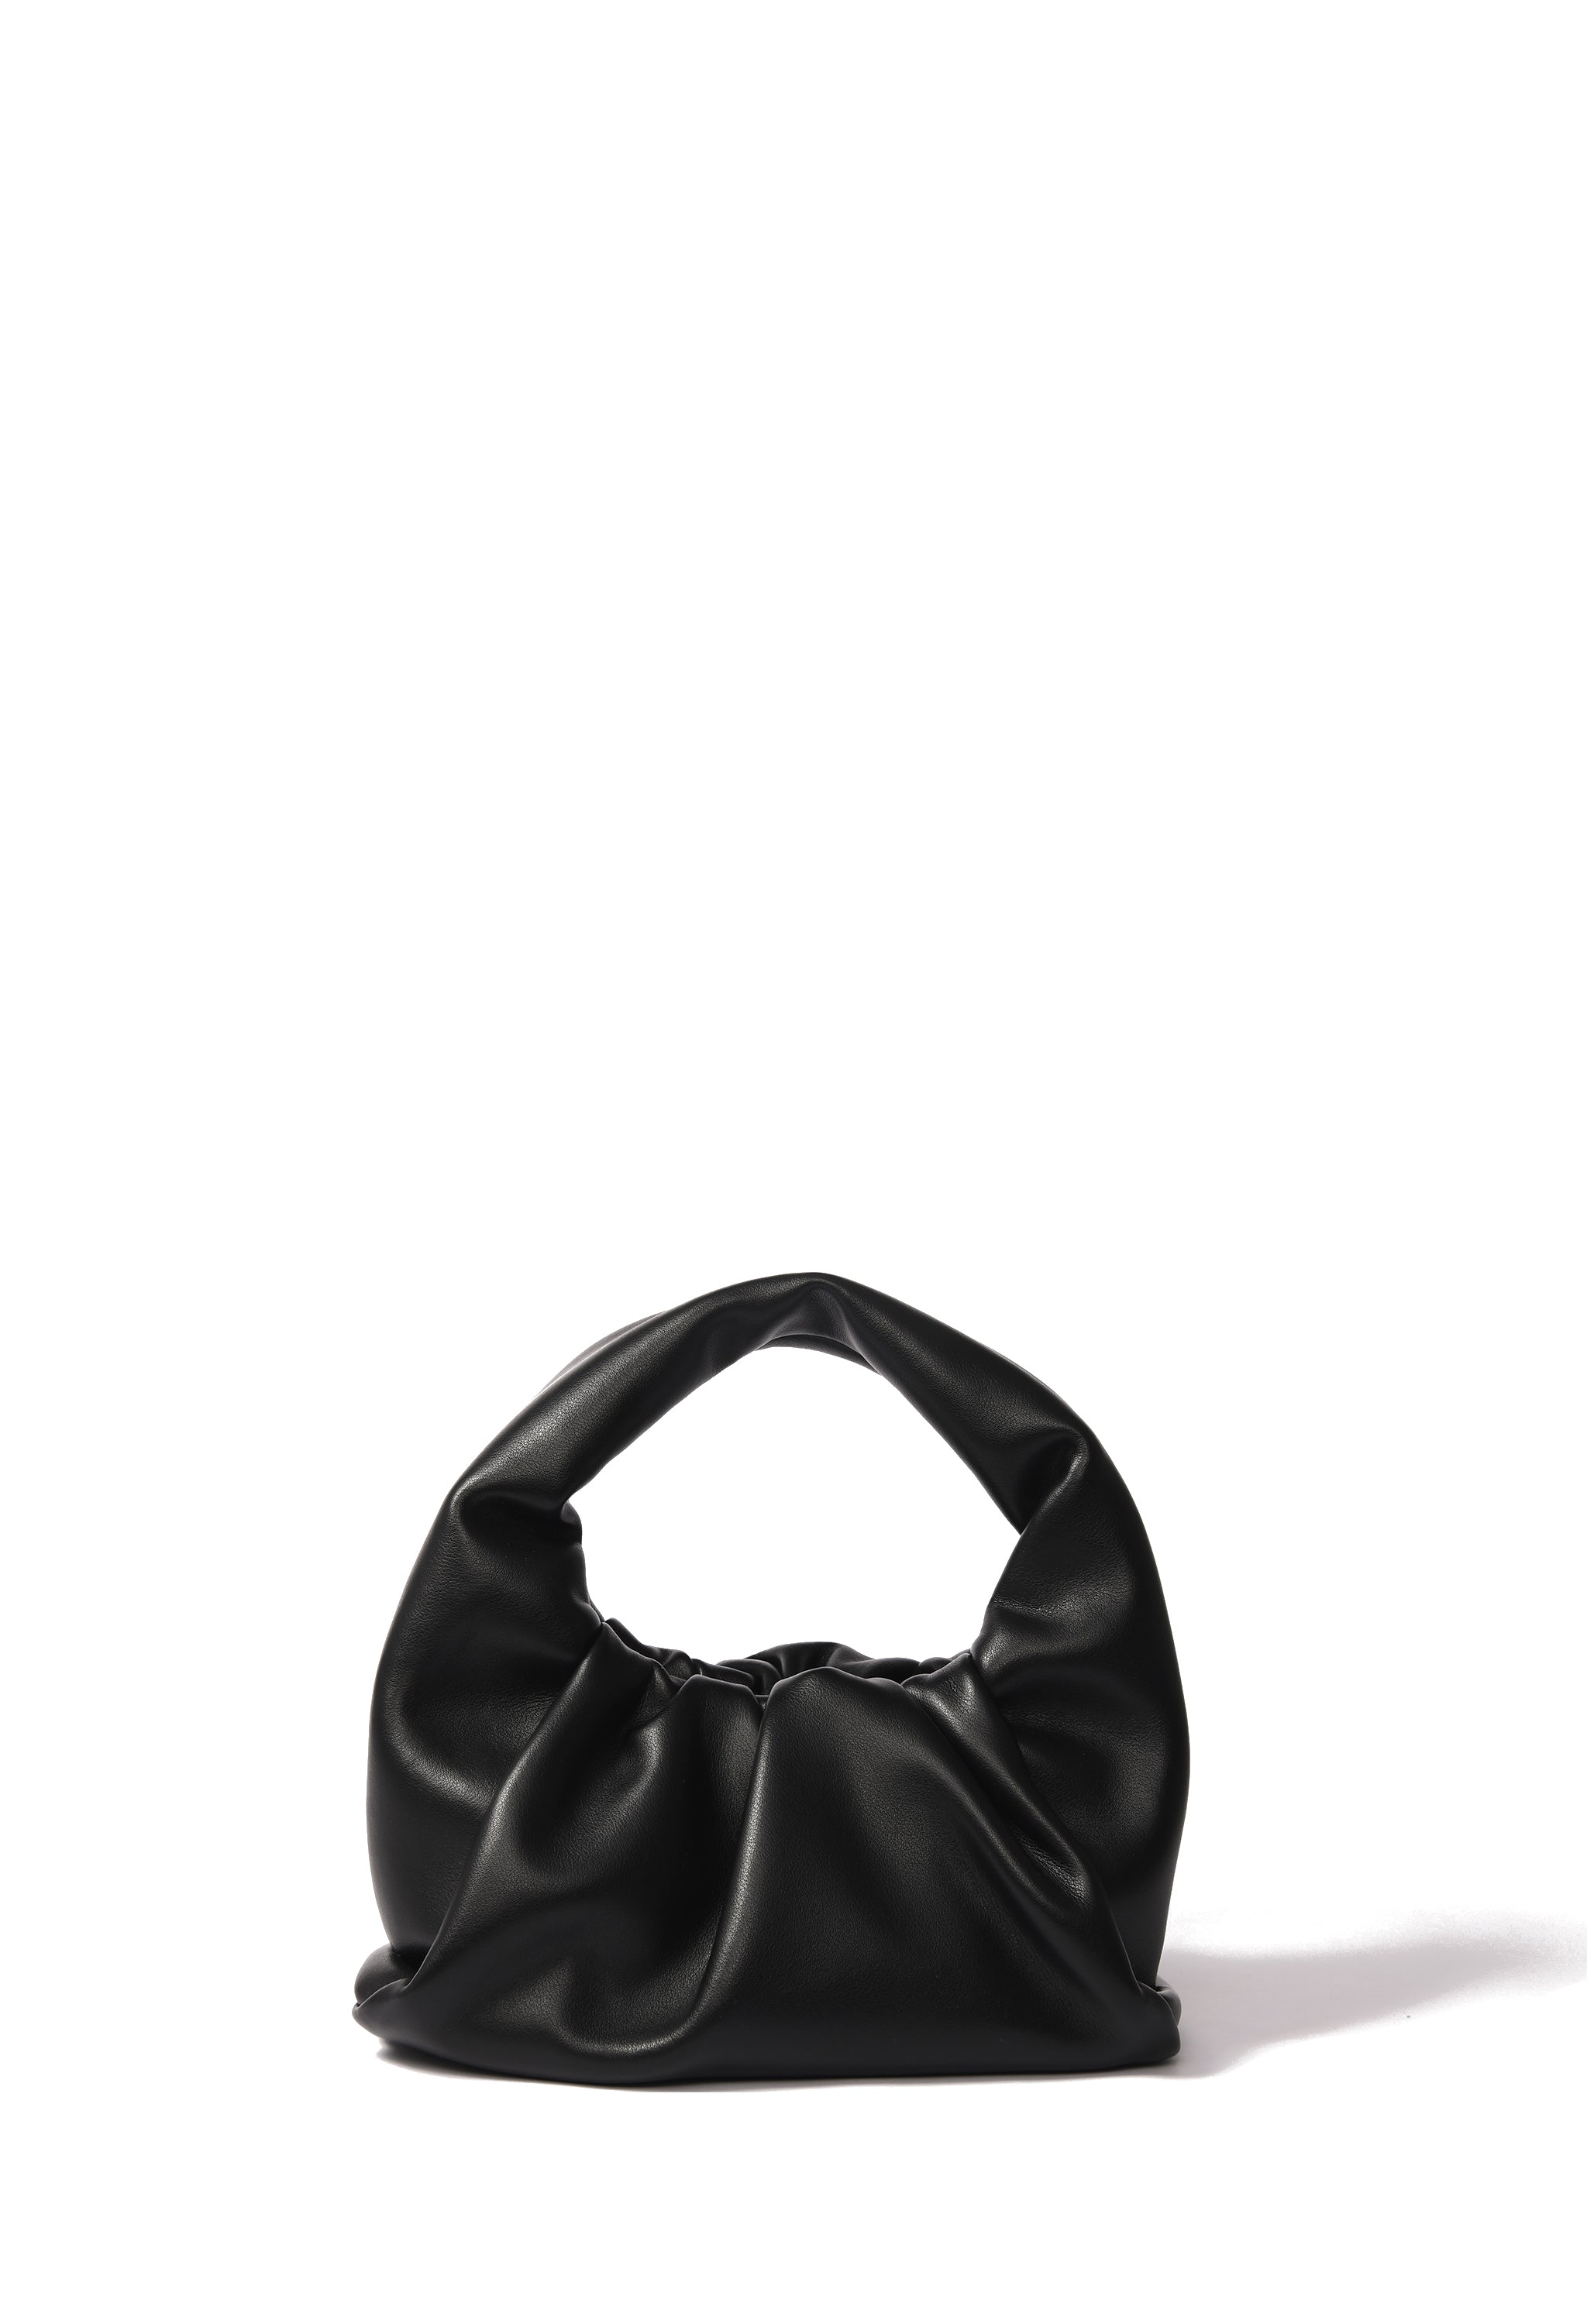 Marshmallow croissant bag in soft leather, Black BOB ORE blue collection on sale 2022